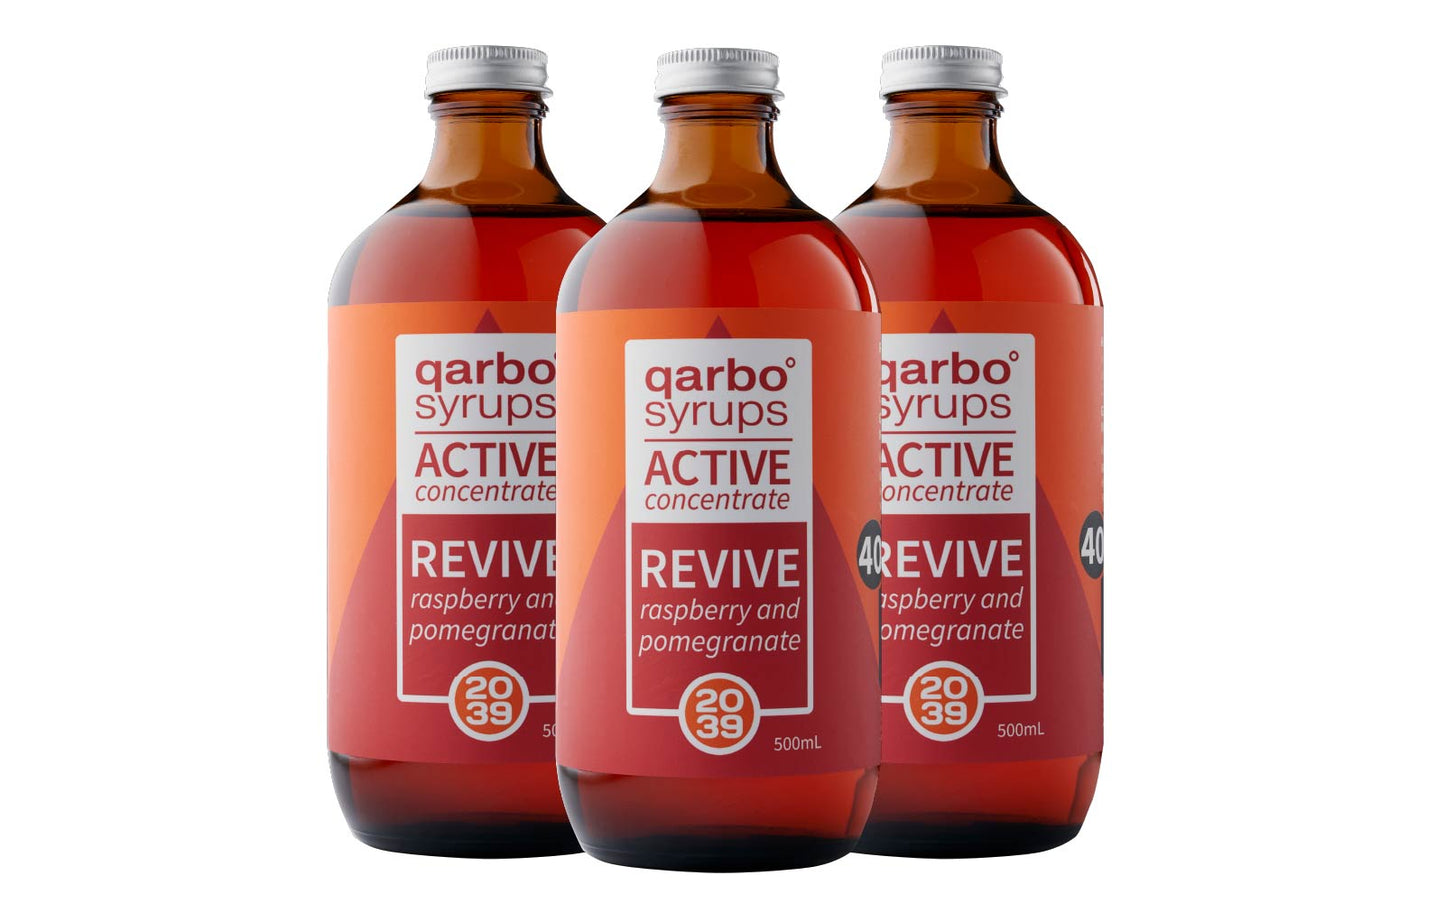 qarbo˚syrups - REVIVE - raspberry and pomegranate